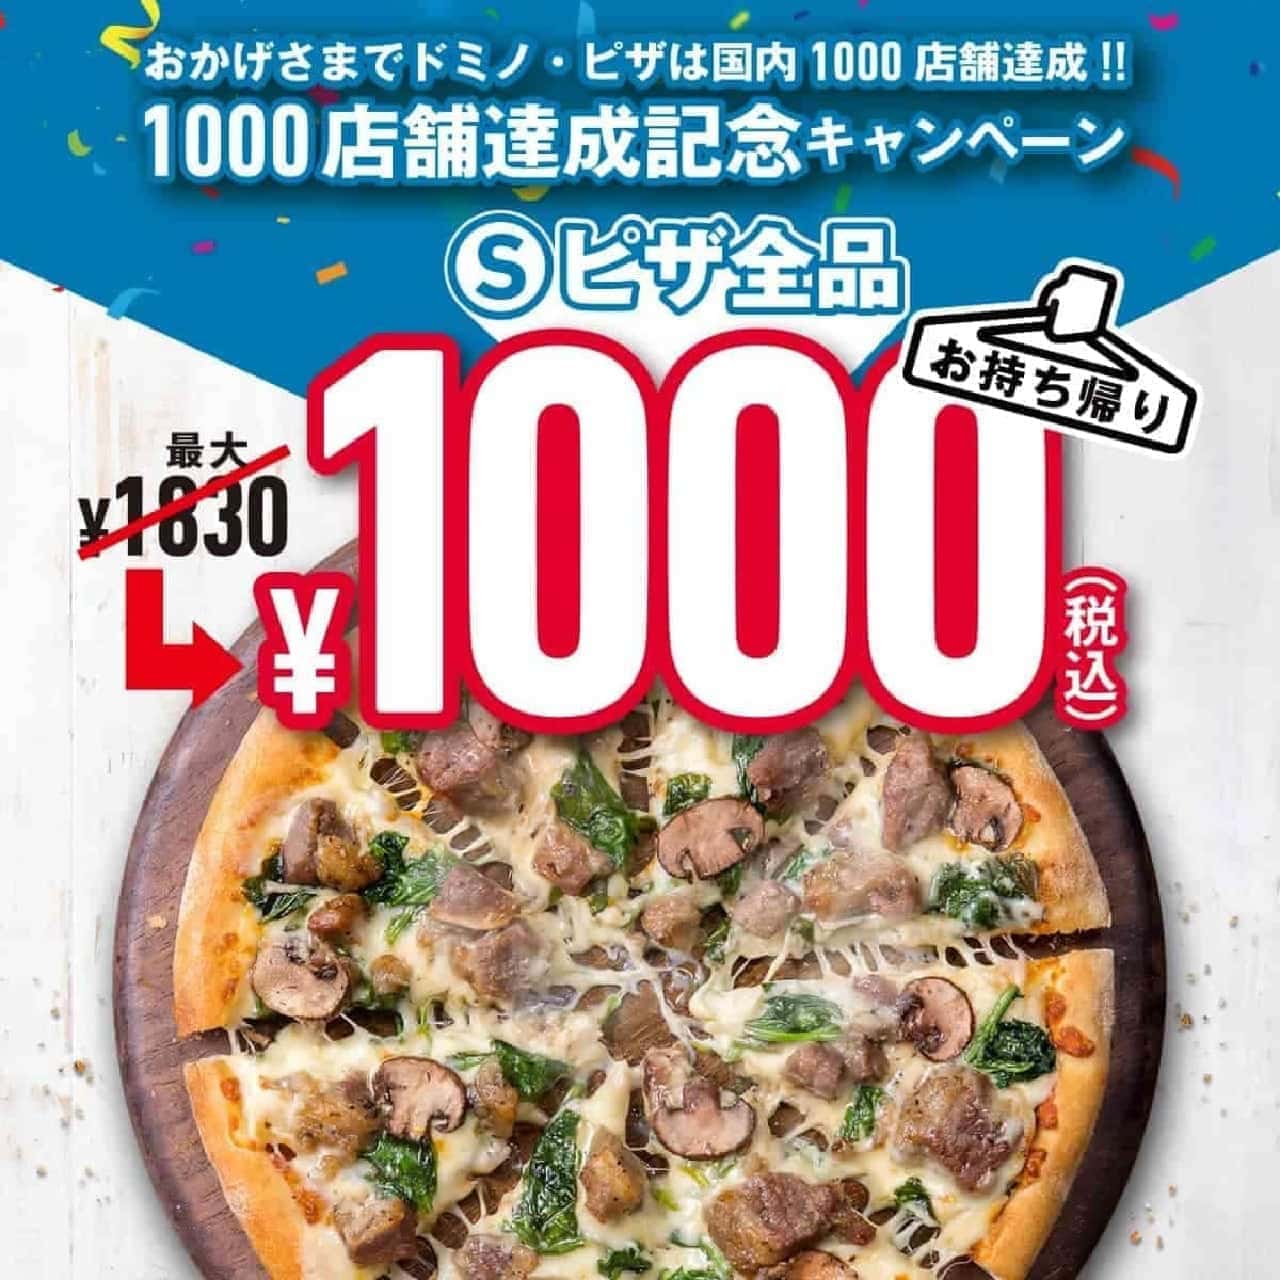 Domino's Pizza "Campaign to Commemorate Reaching 1,000 Stores".